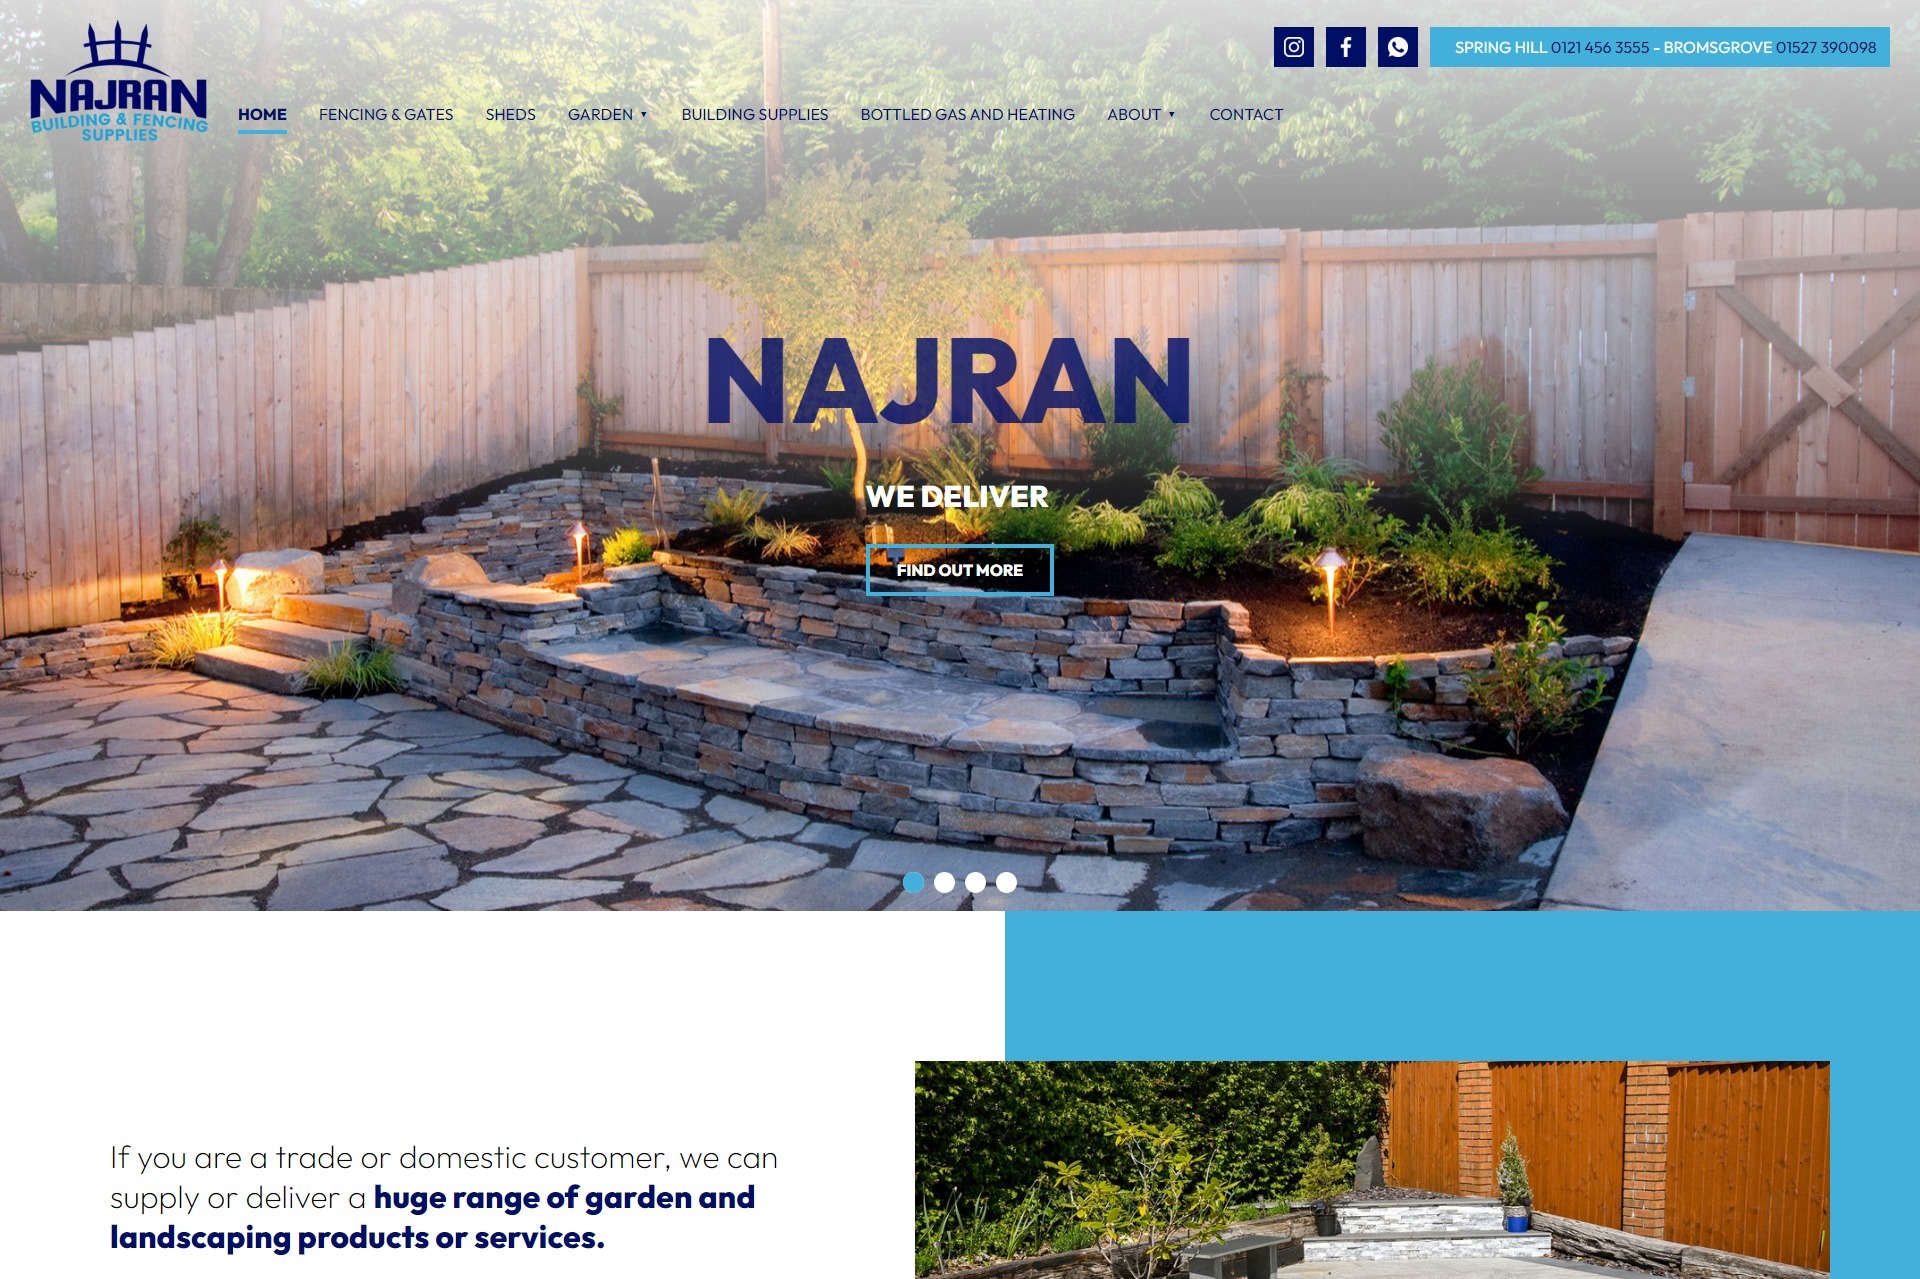 Website design for a garden and landscaping company